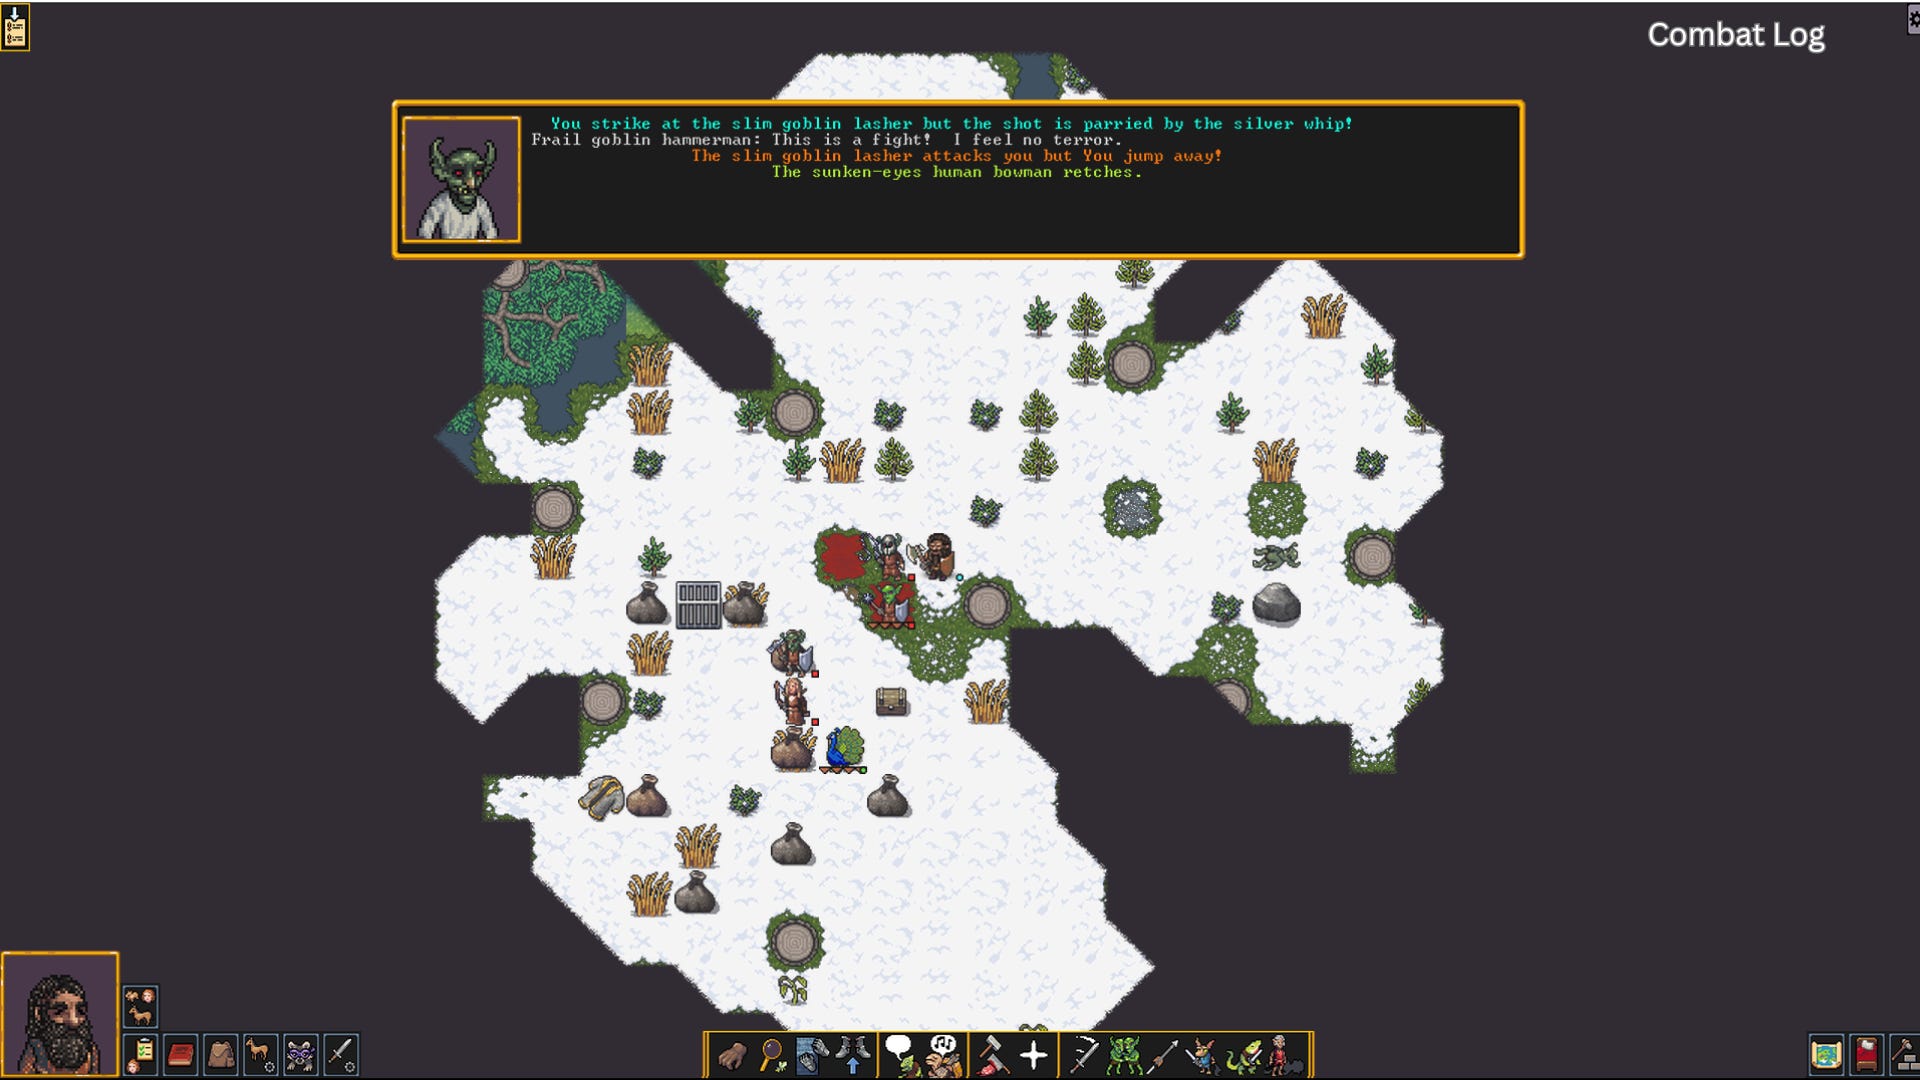 Militia to the gates, please - the Dwarf Fortress Steam edition's Adventure Mode beta is live